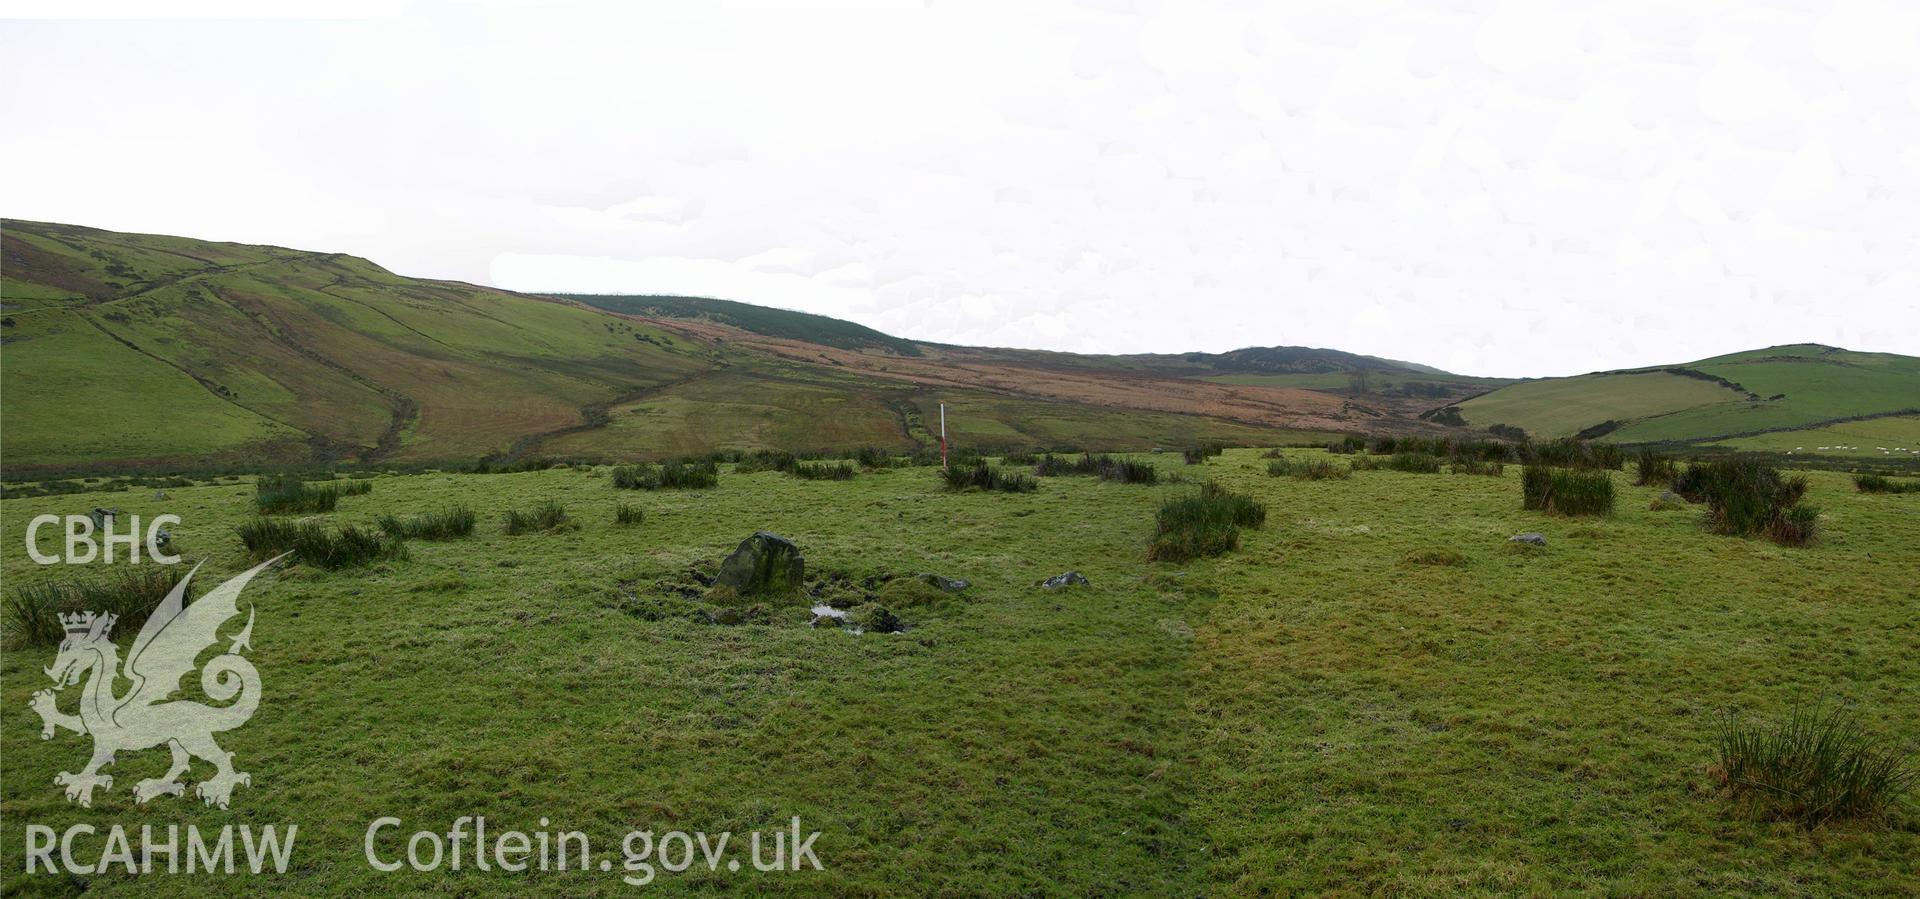 Colour digital photograph showing view of Y Capel Stone Circle Mg179 with Esgair Cwmowen to left and Mynydd Pistyll Du to right - part of archaeological desk based assessment for Esgair Cwmowen, Carno (CAP Report 549).